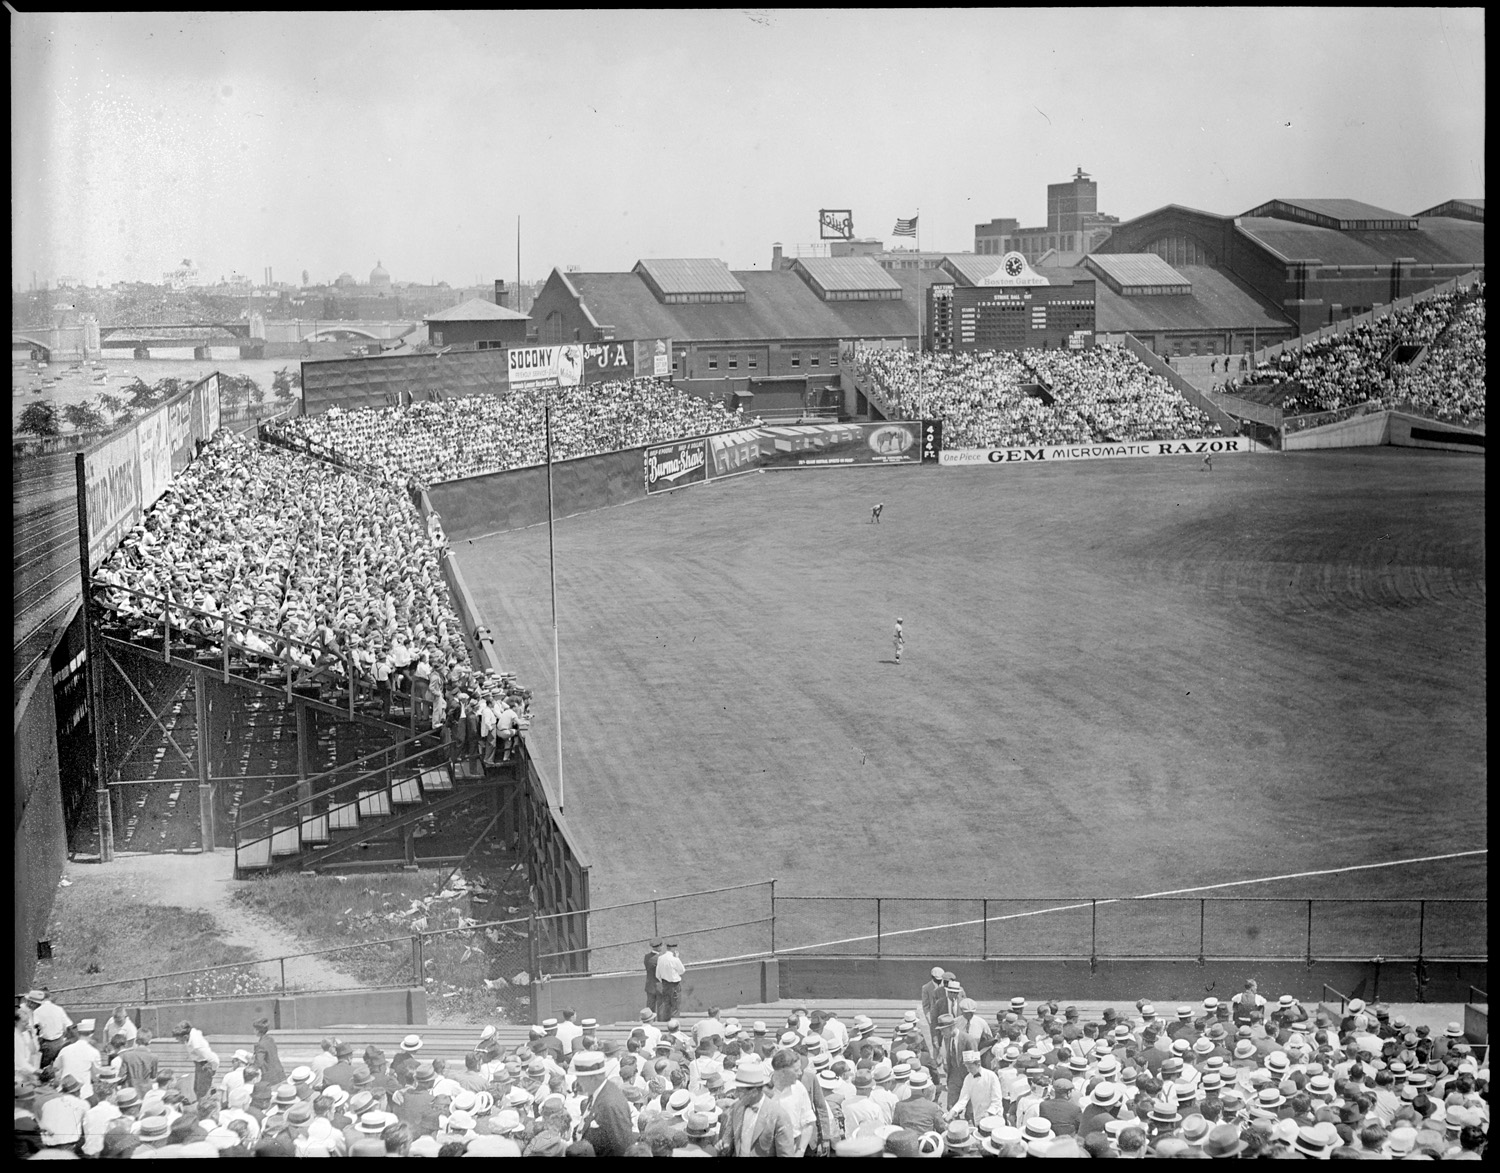 Tens of thousands of fans packed the stands on game day. | Courtesy of the Boston Public Library, Leslie Jones Collection.